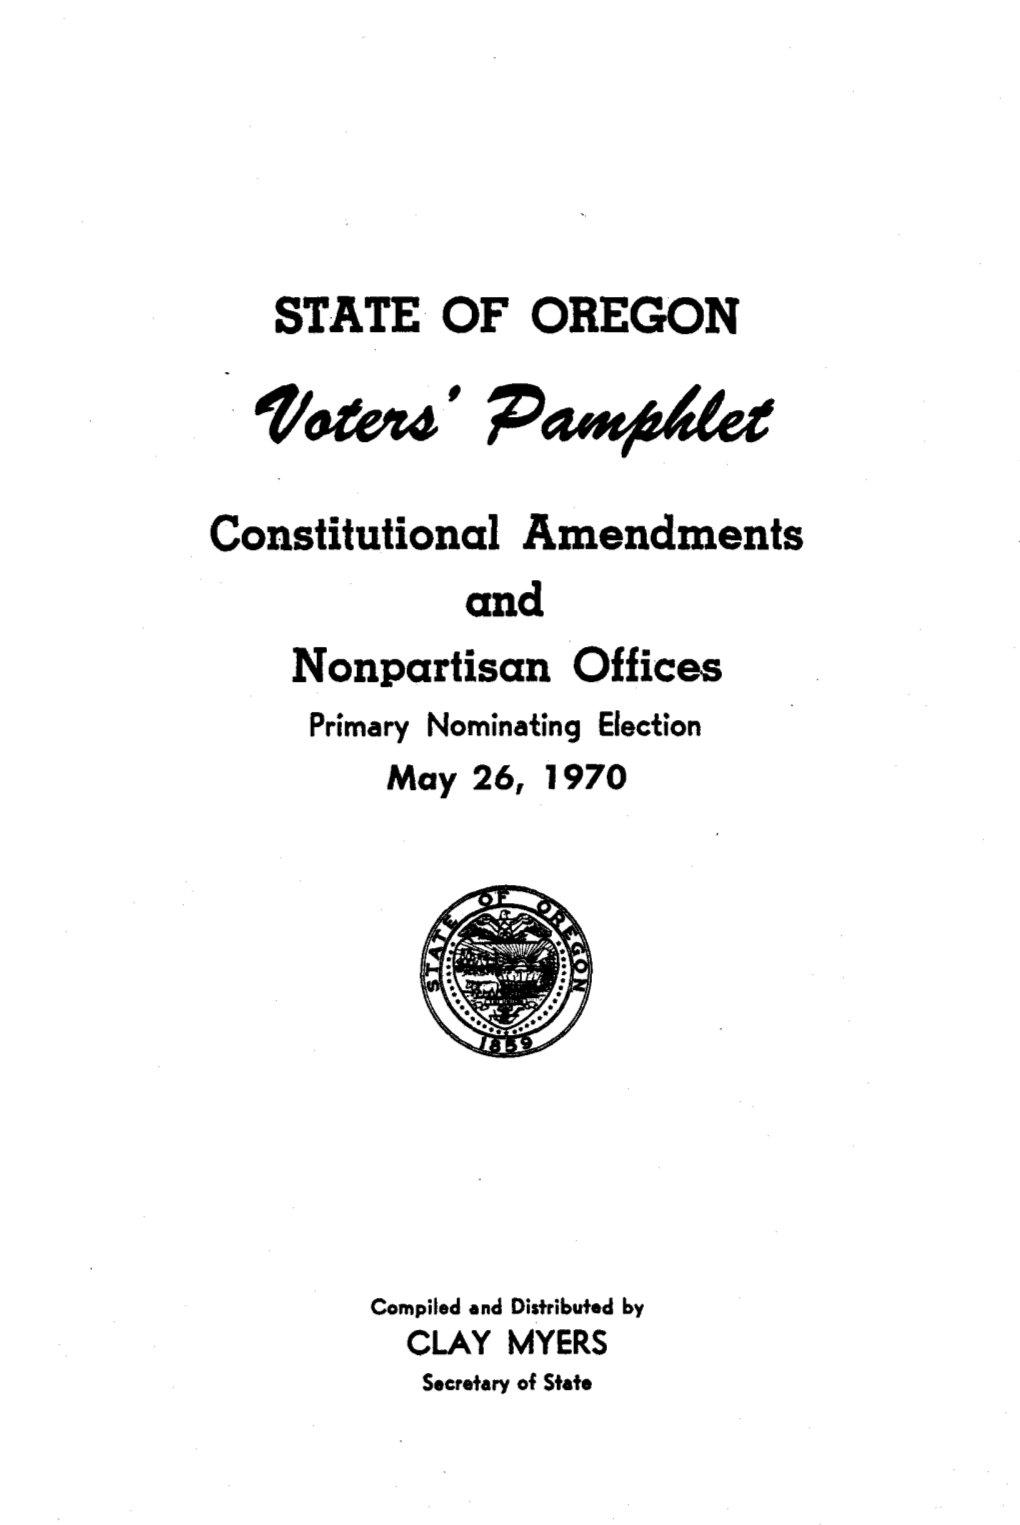 Constitutional Amendments and Nonpartisan Offices Primary Nominating Election May 26, 1970